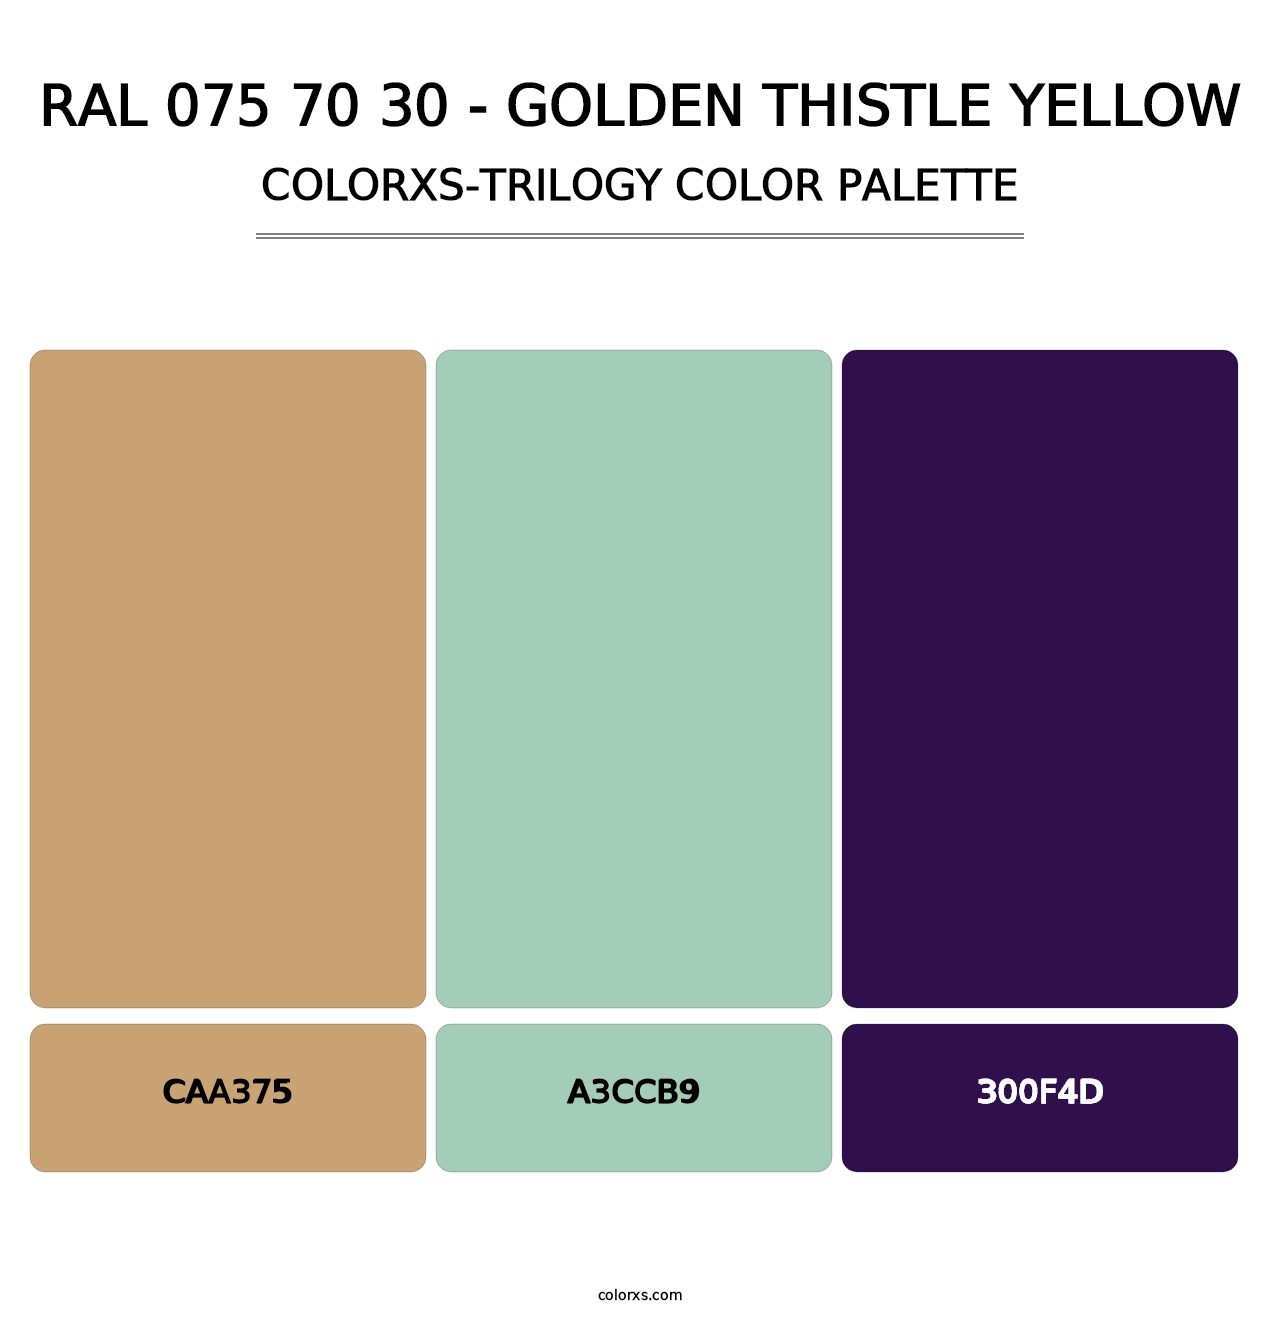 RAL 075 70 30 - Golden Thistle Yellow - Colorxs Trilogy Palette